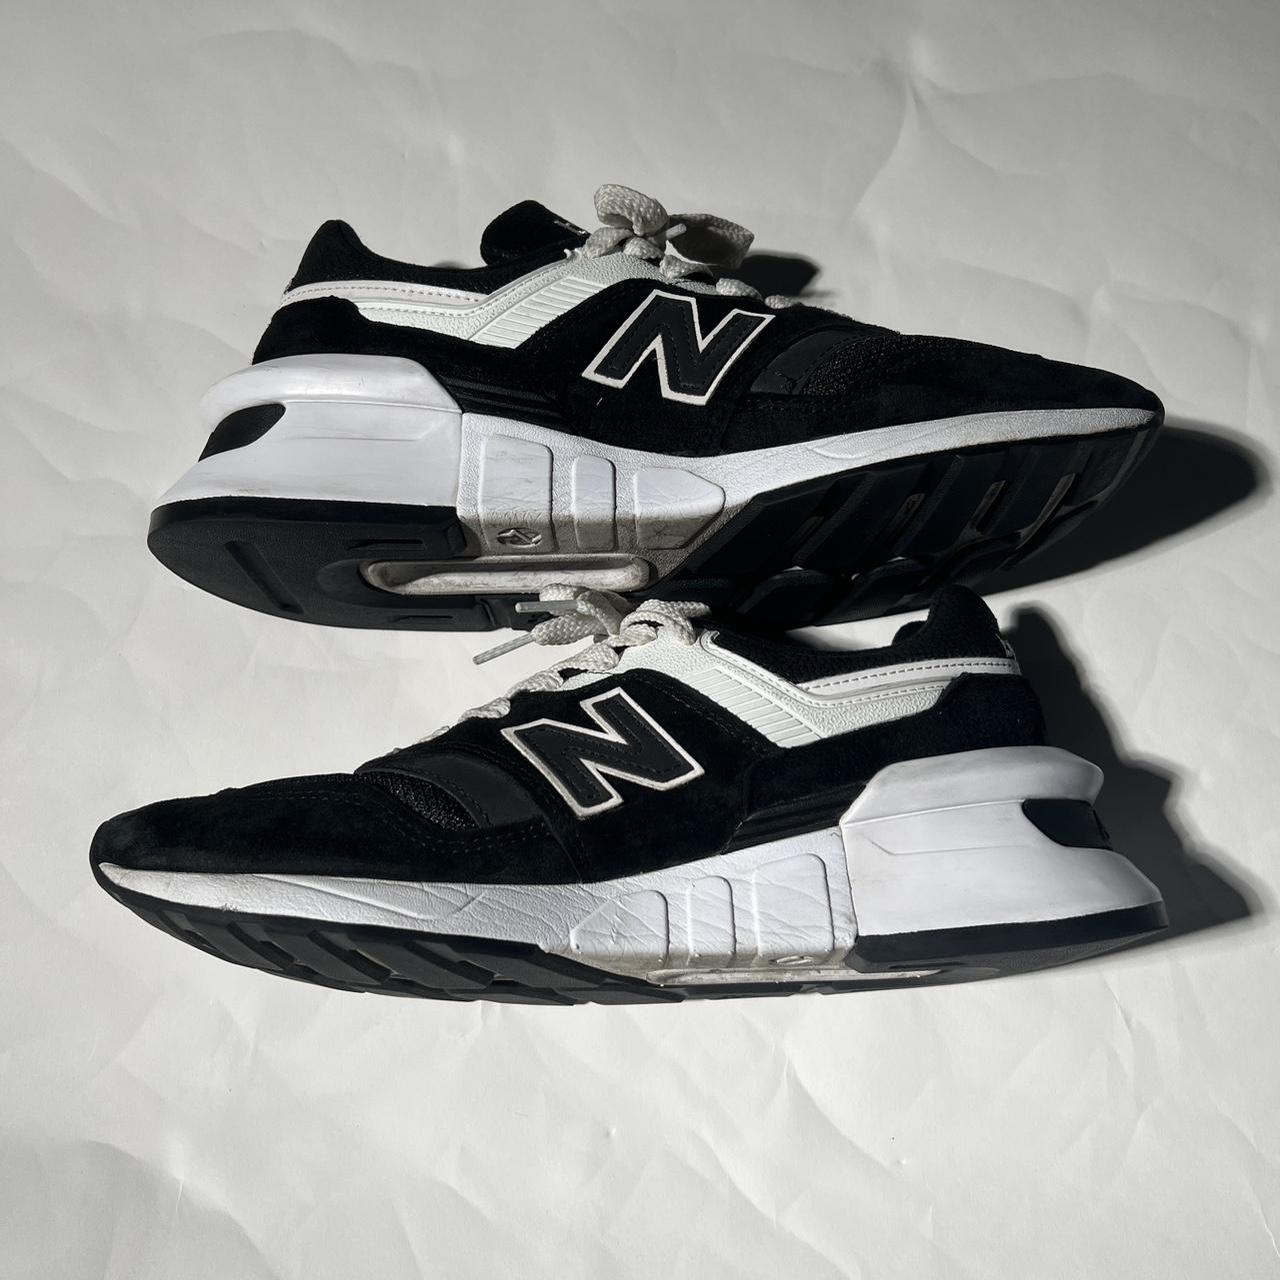 New Balance Men's Black and White Trainers - 4